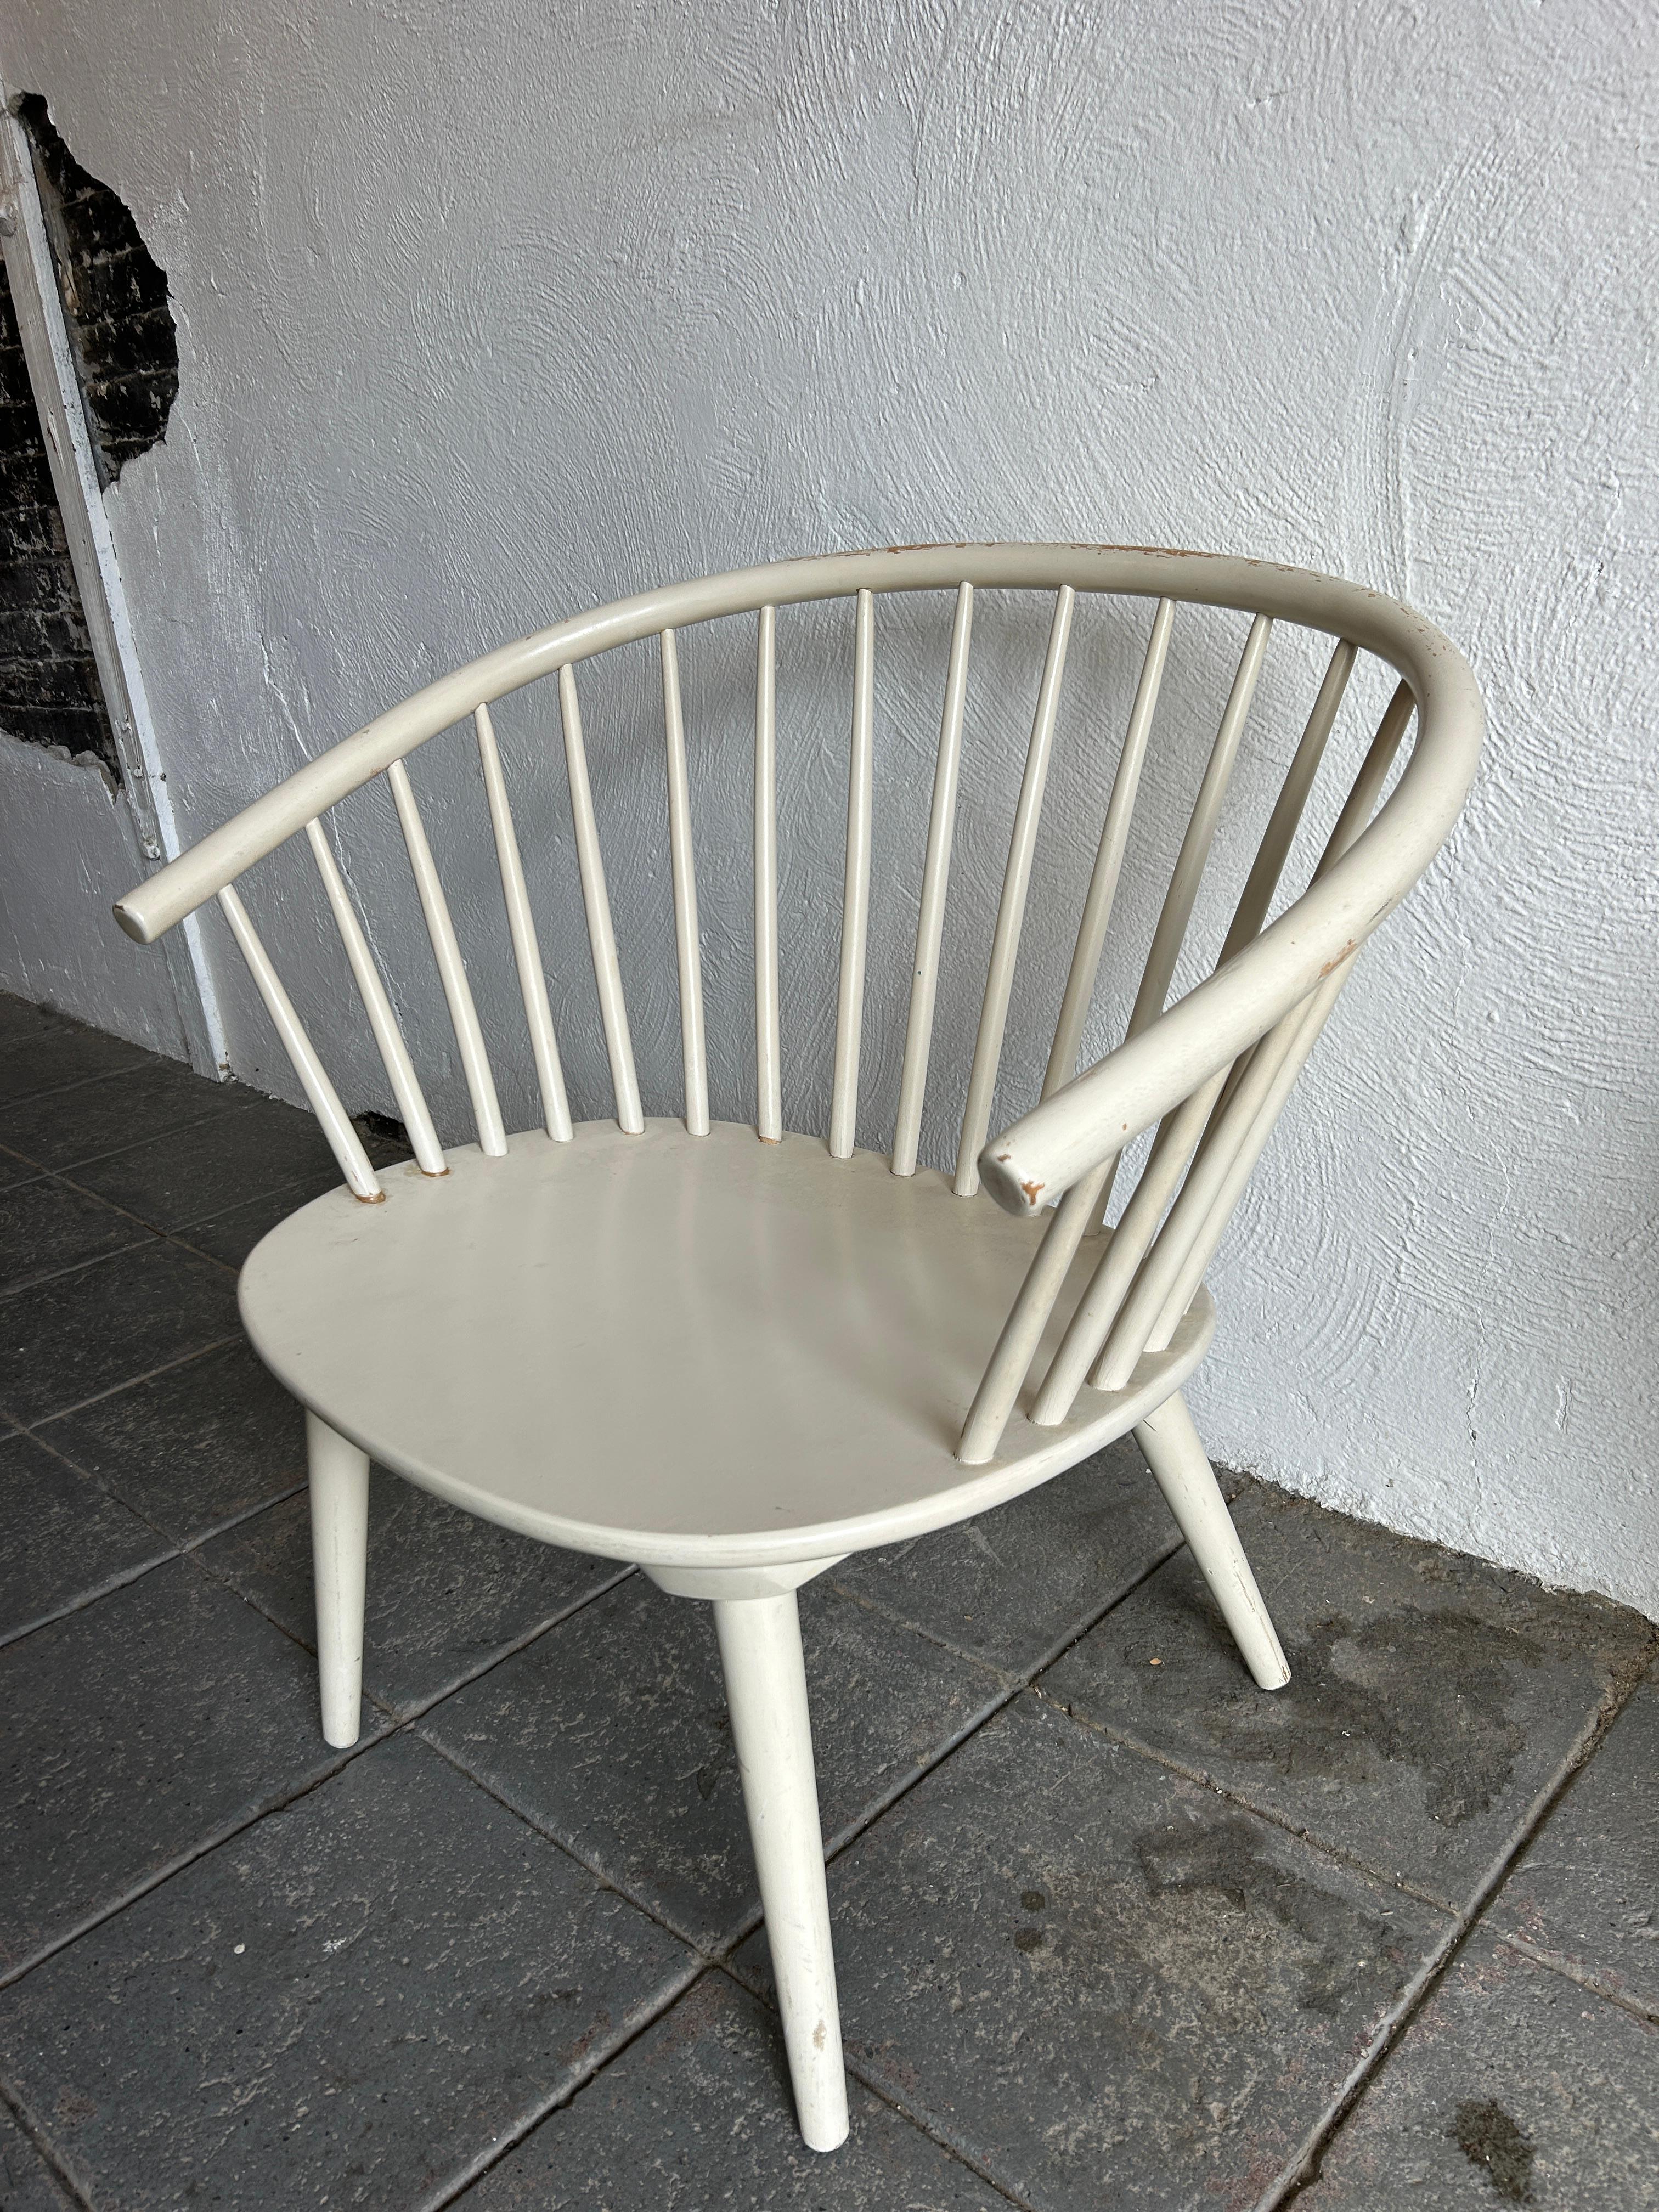 Swedish Armchair by Gillis Lundgren for IKEA, 1961. Original ivory white paint some paint missing on top of back and a few nicks otherwise beautiful of white color. Chair is very structural all legs unscrew. Very wonderful spindle back chair all